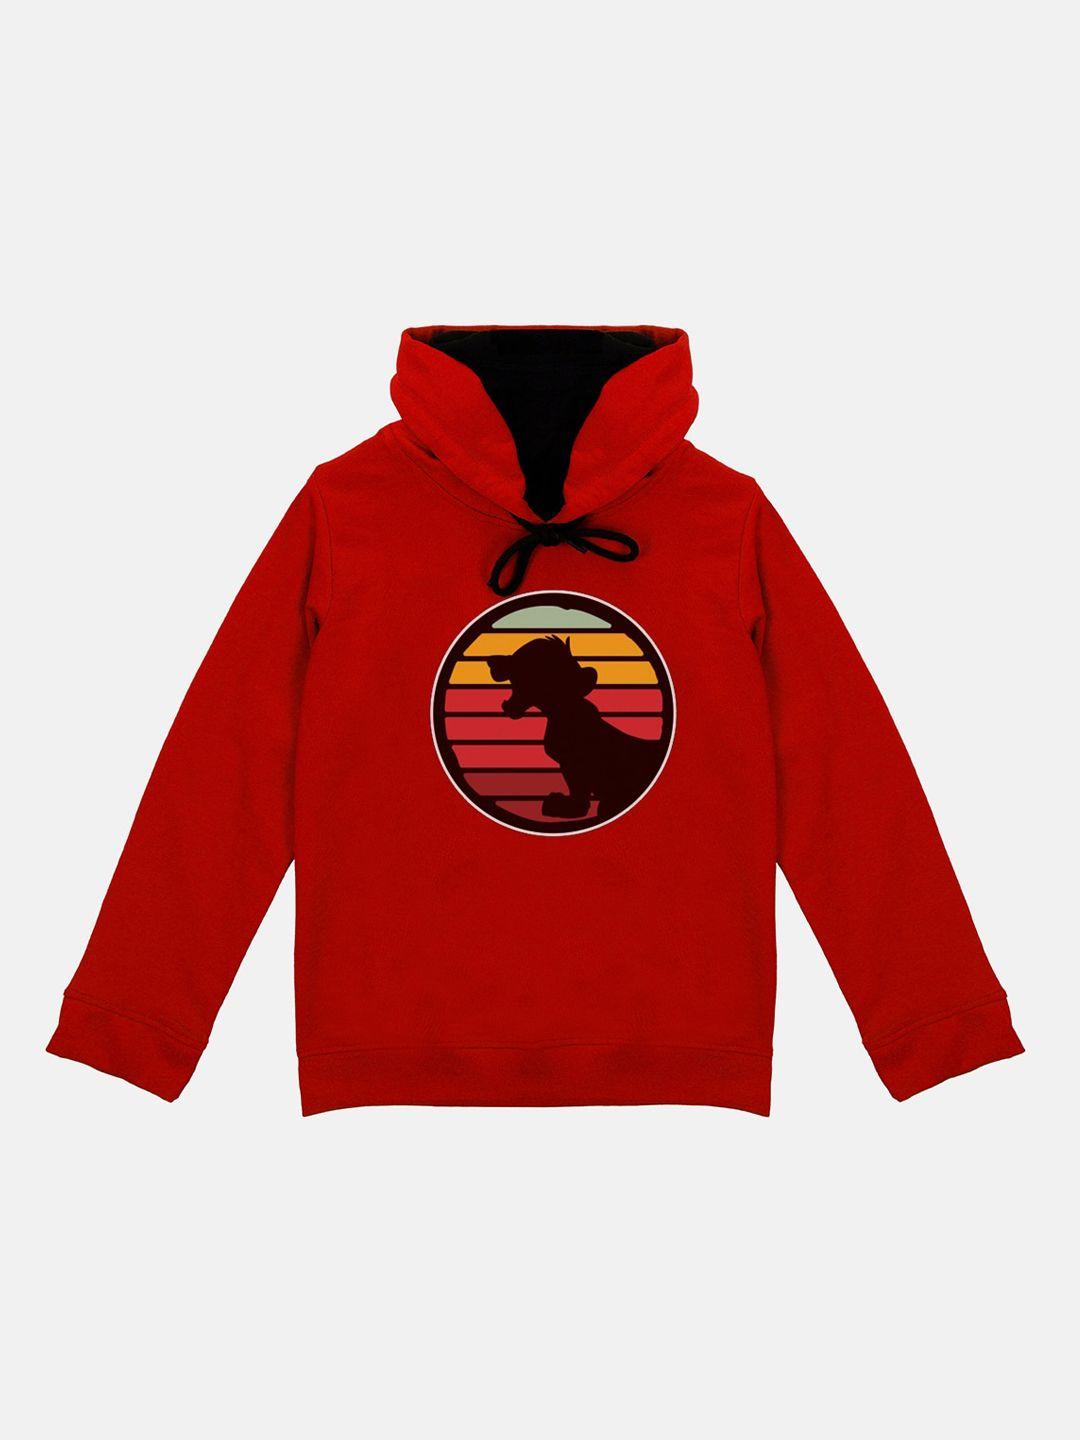 disney-by-wear-your-mind-boys-red-printed-hooded-sweatshirt-with-attached-face-covering